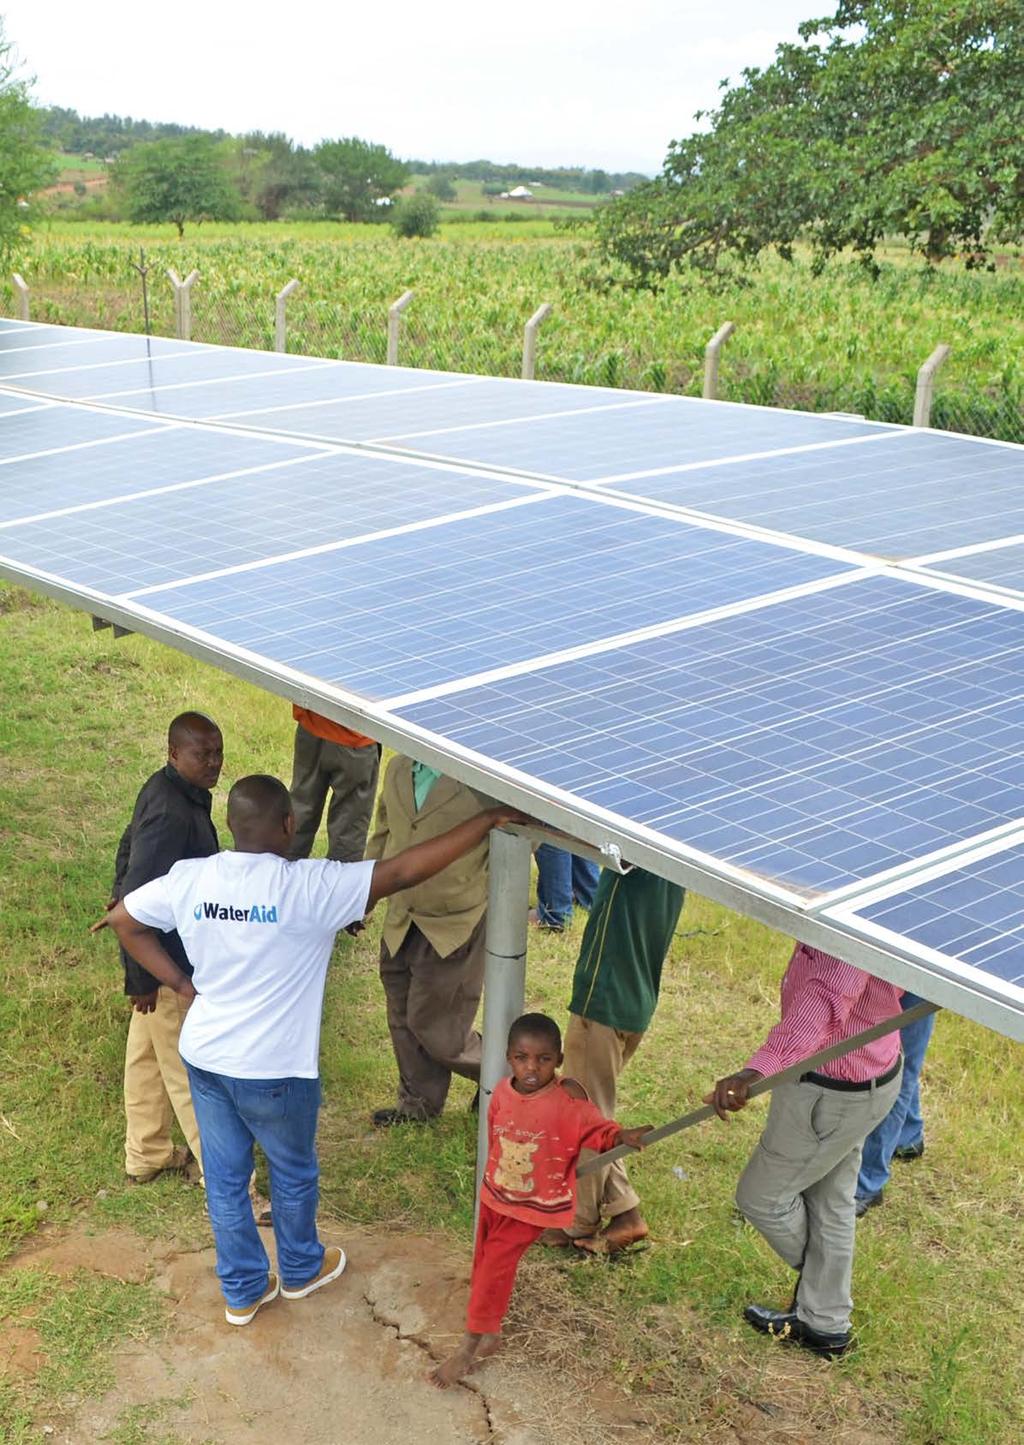 Innovative technology: WaterAid piloted a solar-powered borehole project in Babati, Manyara region, which